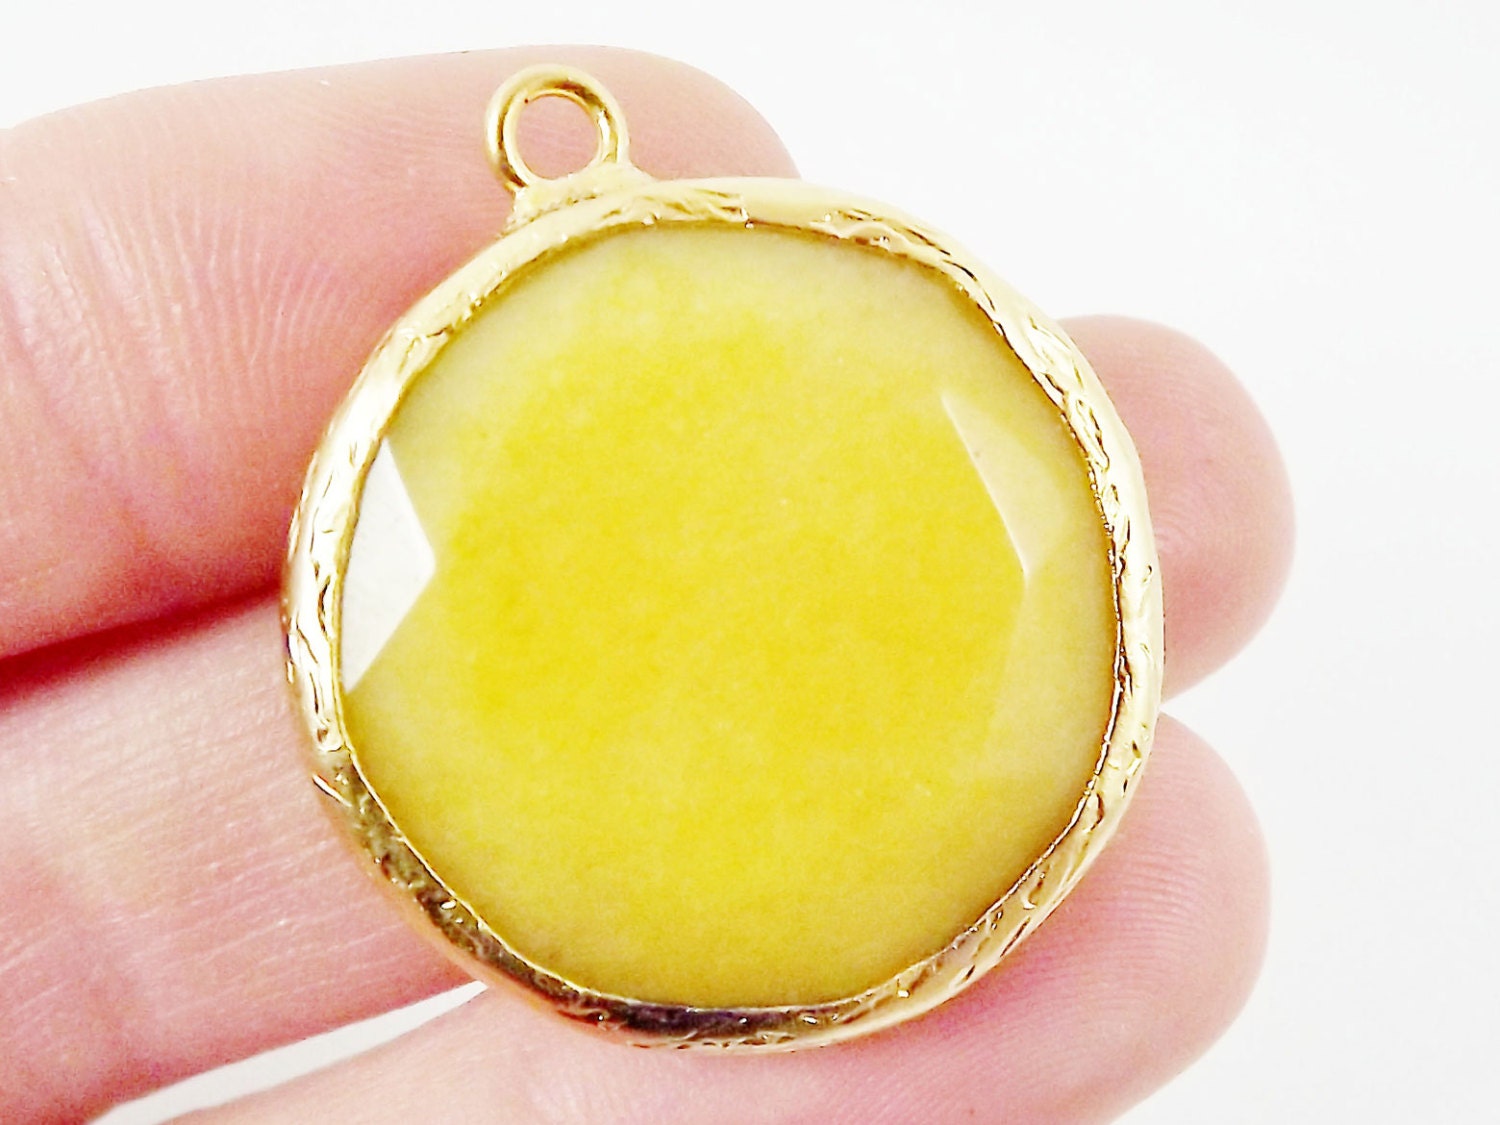 26mm Yellow Faceted Jade Pendant - Gold plated Bezel - 1pc